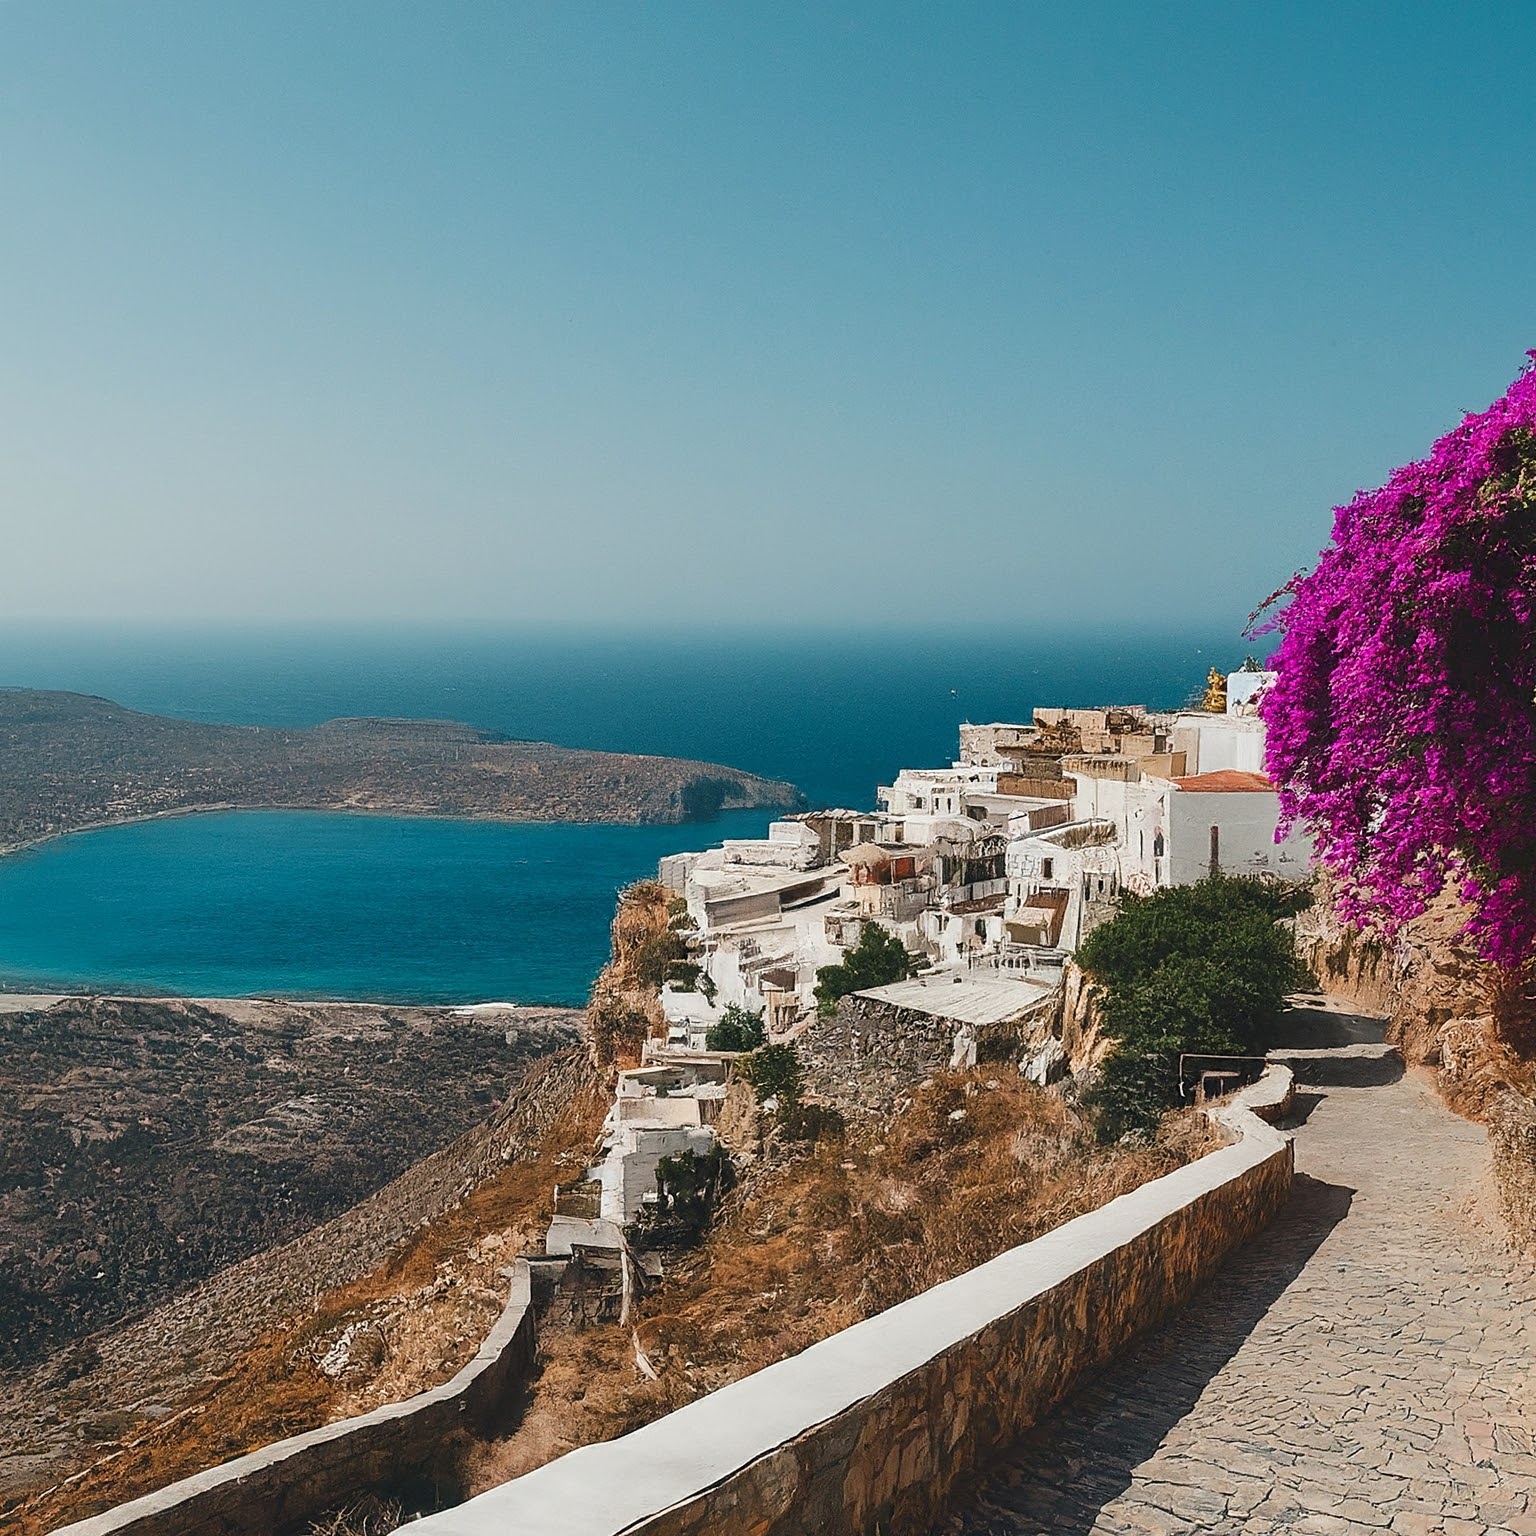 Traditional village in Crete, Greece, with whitewashed houses, bougainvillea flowers, and Aegean Sea view.